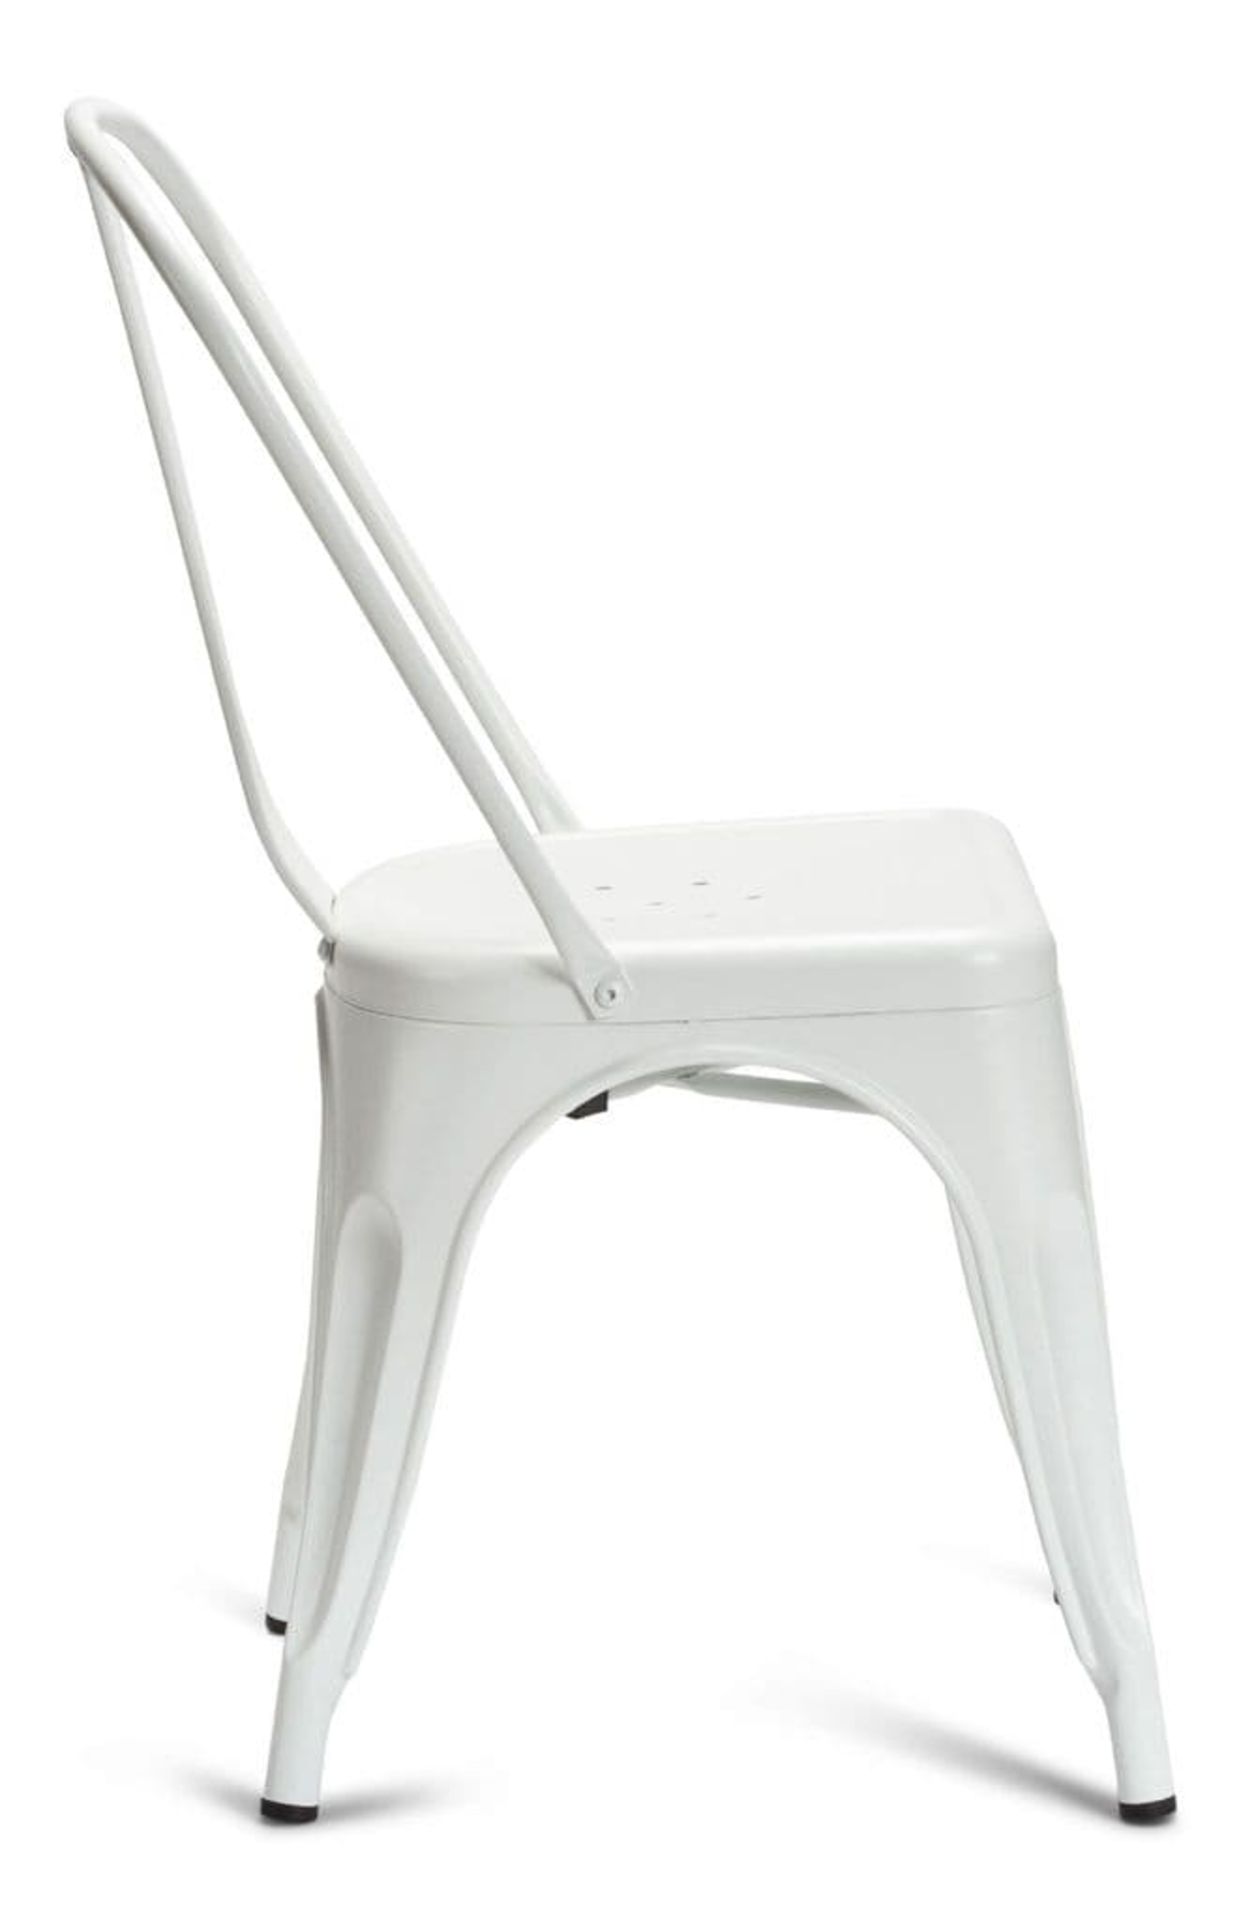 1 x Tolix Industrial Style Outdoor Bistro Table and Chair Set in White- Includes 1 x Table and 4 x - Image 10 of 12